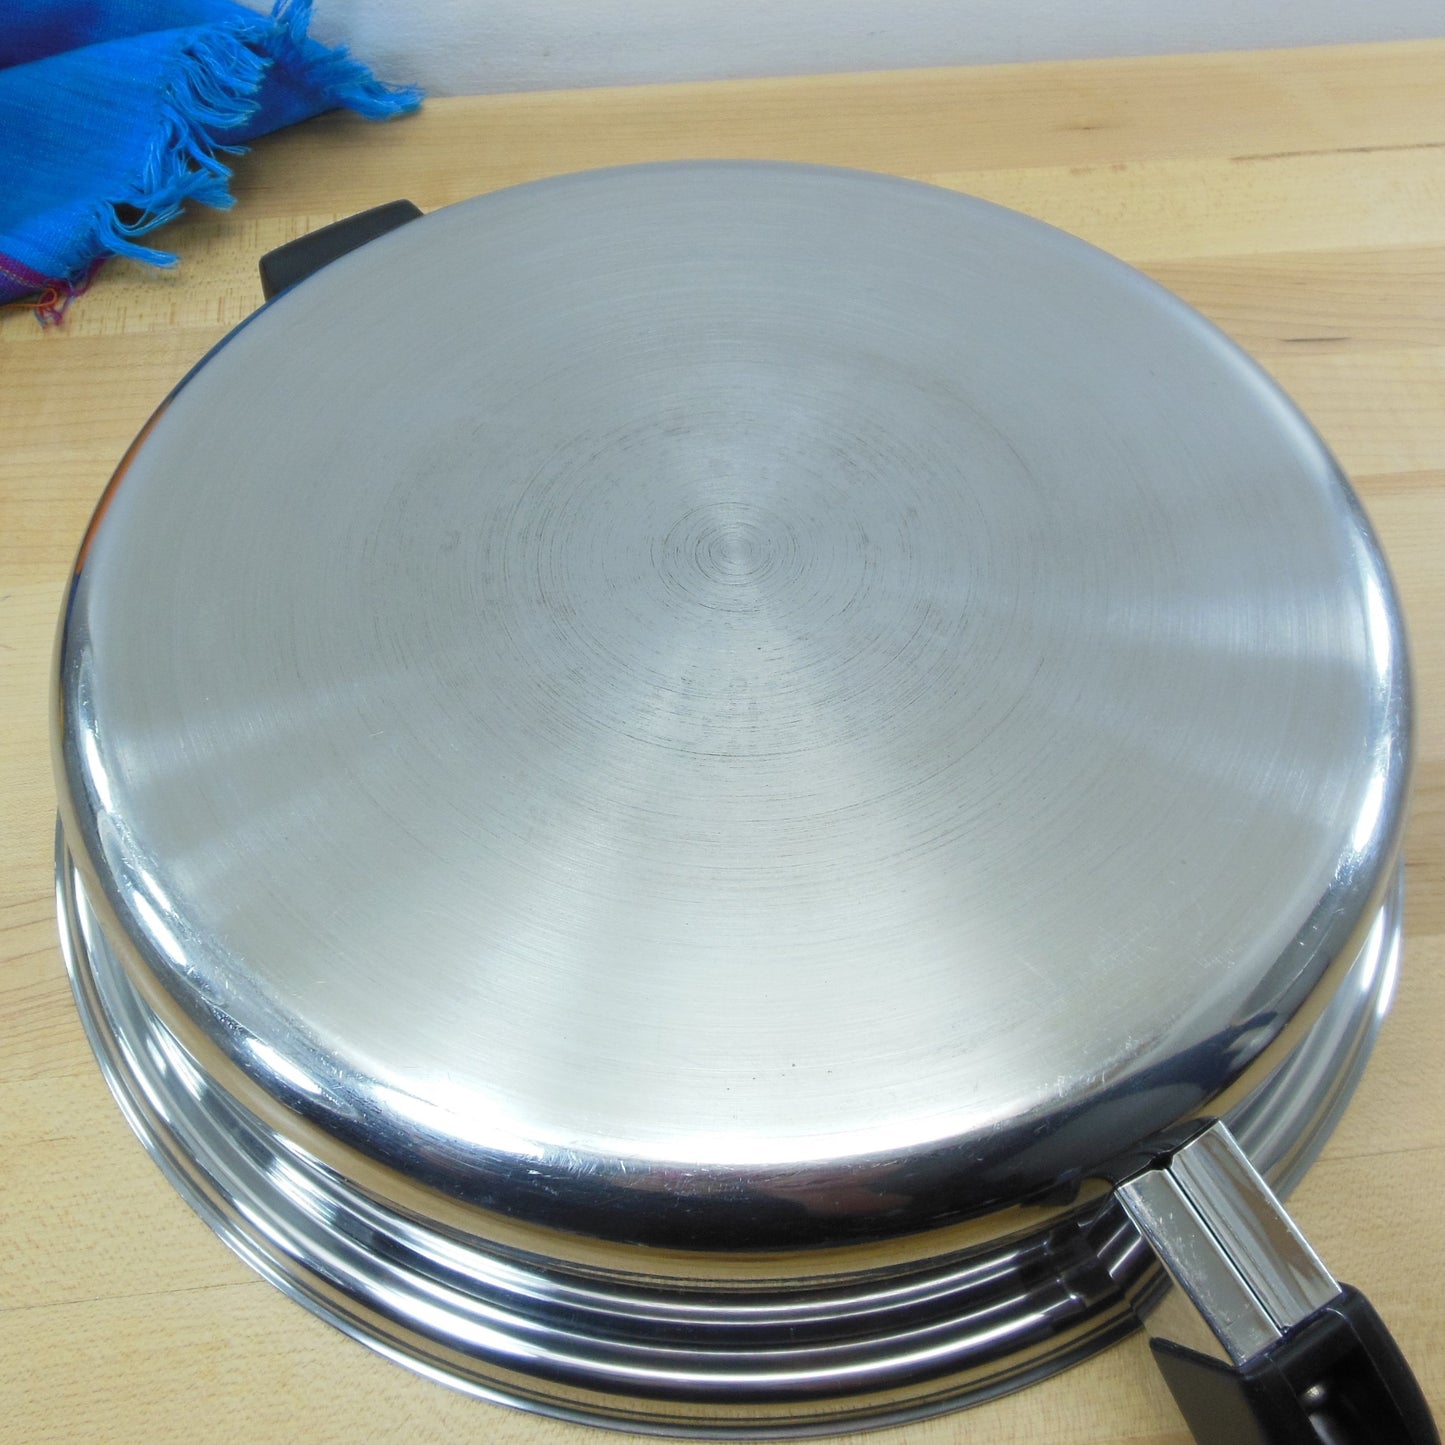 Cutco USA 5 Ply Stainless 11.5" Open Fry Pan Skillet Aluminum Core